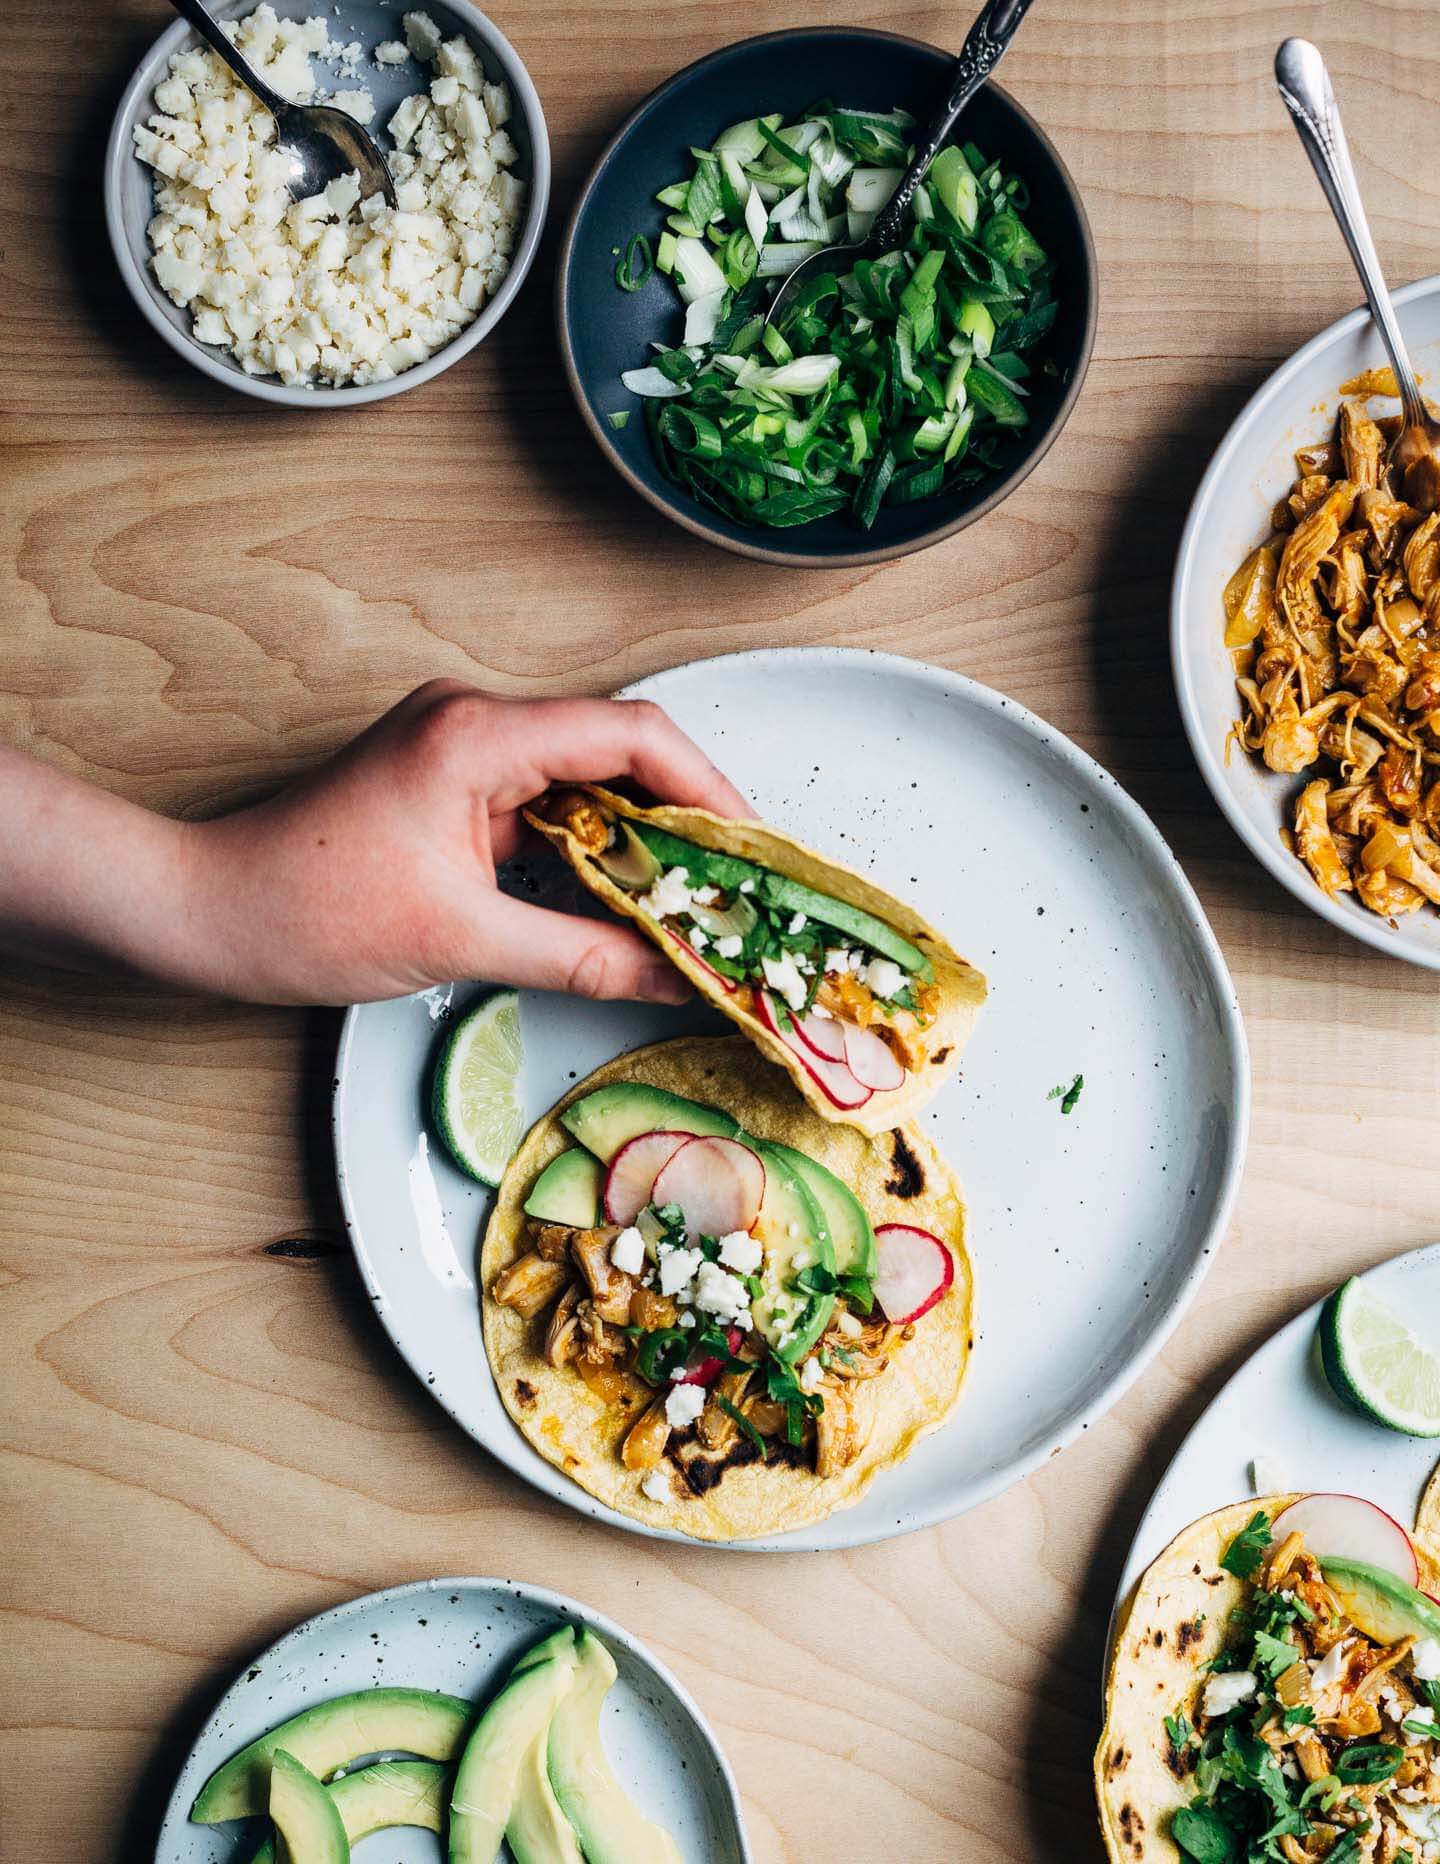 Chipotle chilies in adobo sauce lend smoky heat to these classic chicken tacos topped with avocado, radish, cilantro, and crumbled cotija. This post was created in partnership with SVO Farmer Focus Chicken. 